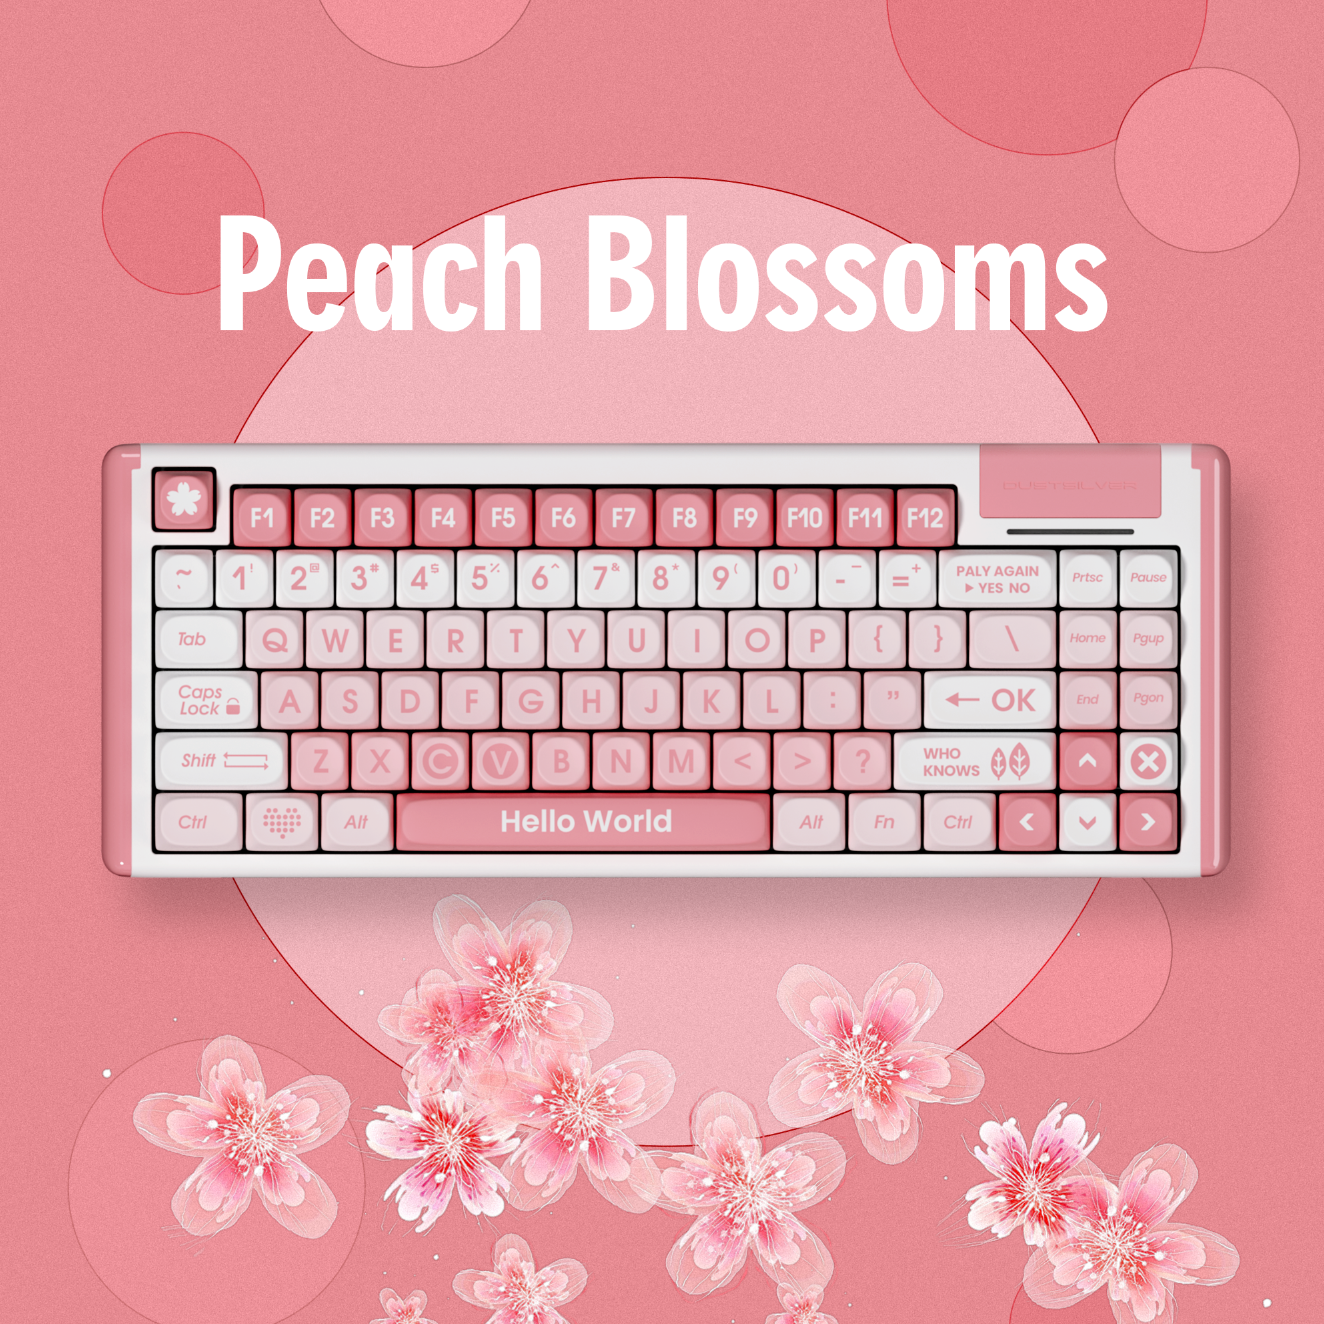 Dustsilver K84 Peach Blossoms Wired 75% layout Welded Switch Mechanical Keyboard Peach Blossoms / Gateron G Pro Red Switch